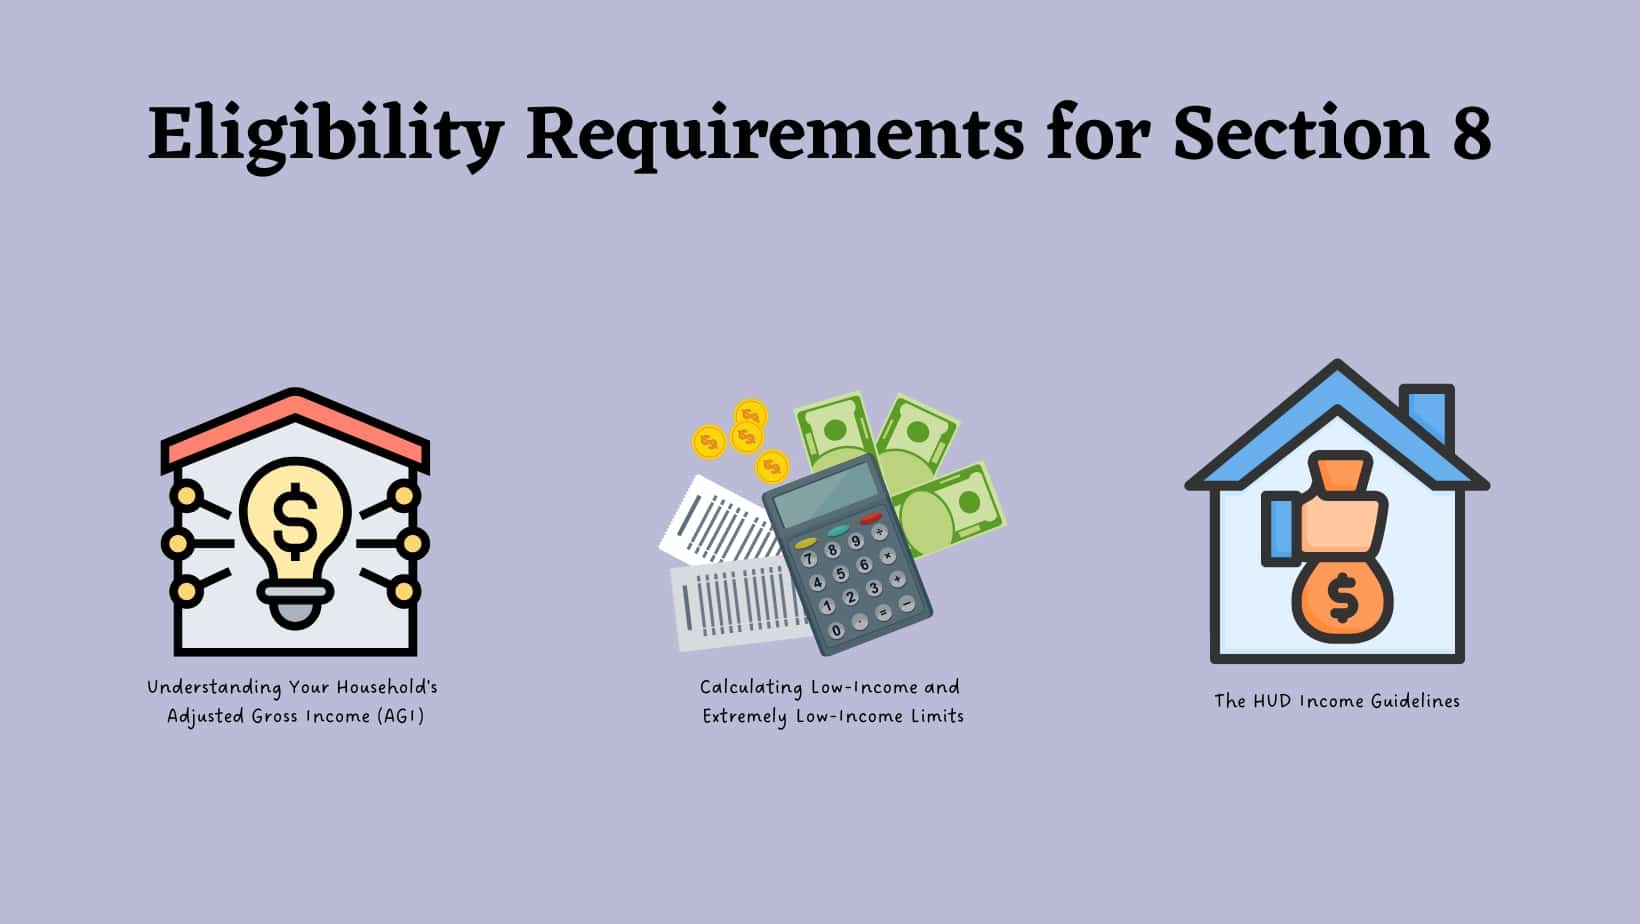 Eligibility Requirements for Section 8